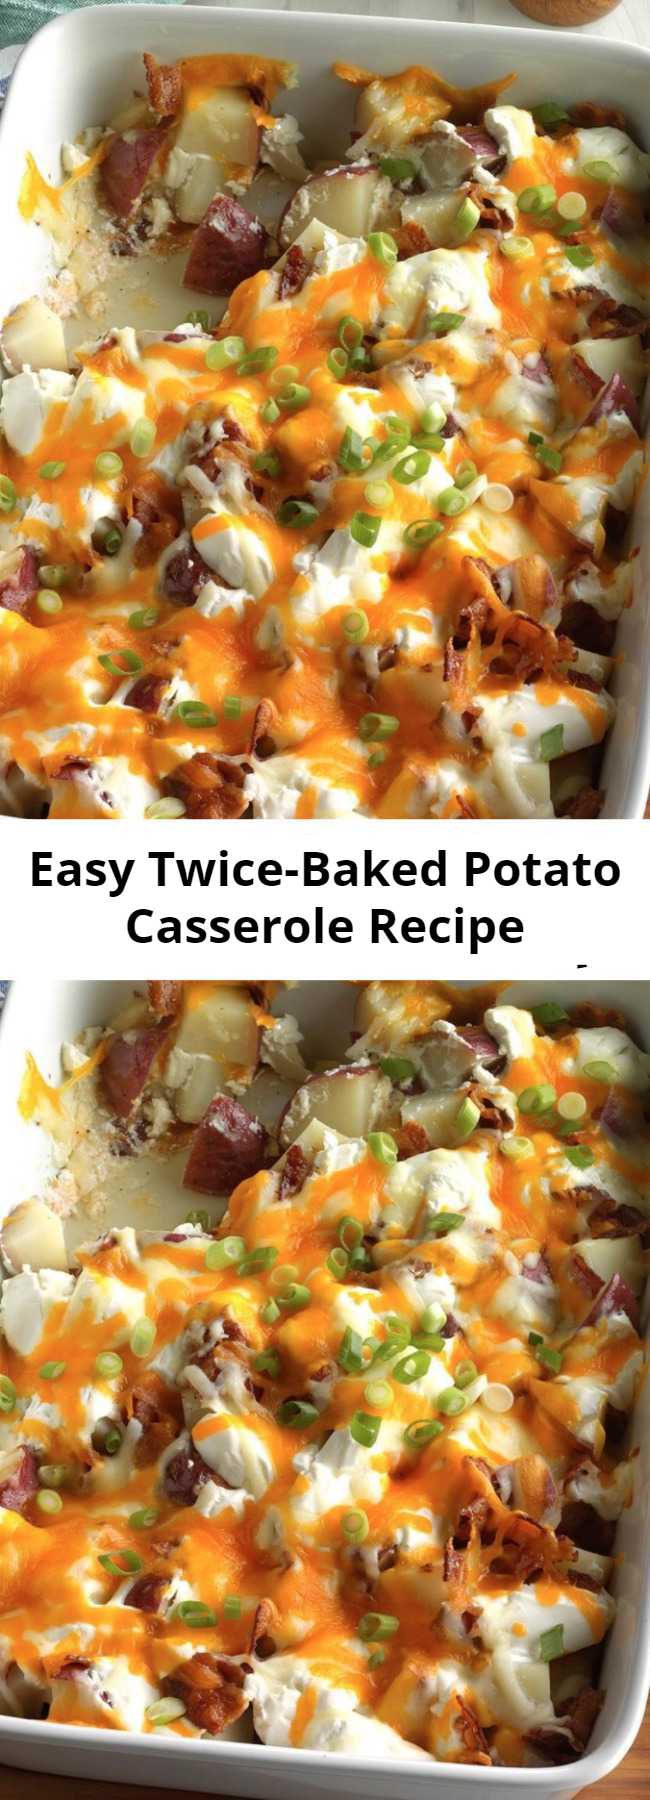 Easy Twice-Baked Potato Casserole Recipe - My daughter gave me this twice-baked potatoes recipe because she knows I love potatoes. The hearty casserole is loaded with a palate-pleasing combination of bacon, cheeses, green onions and sour cream.